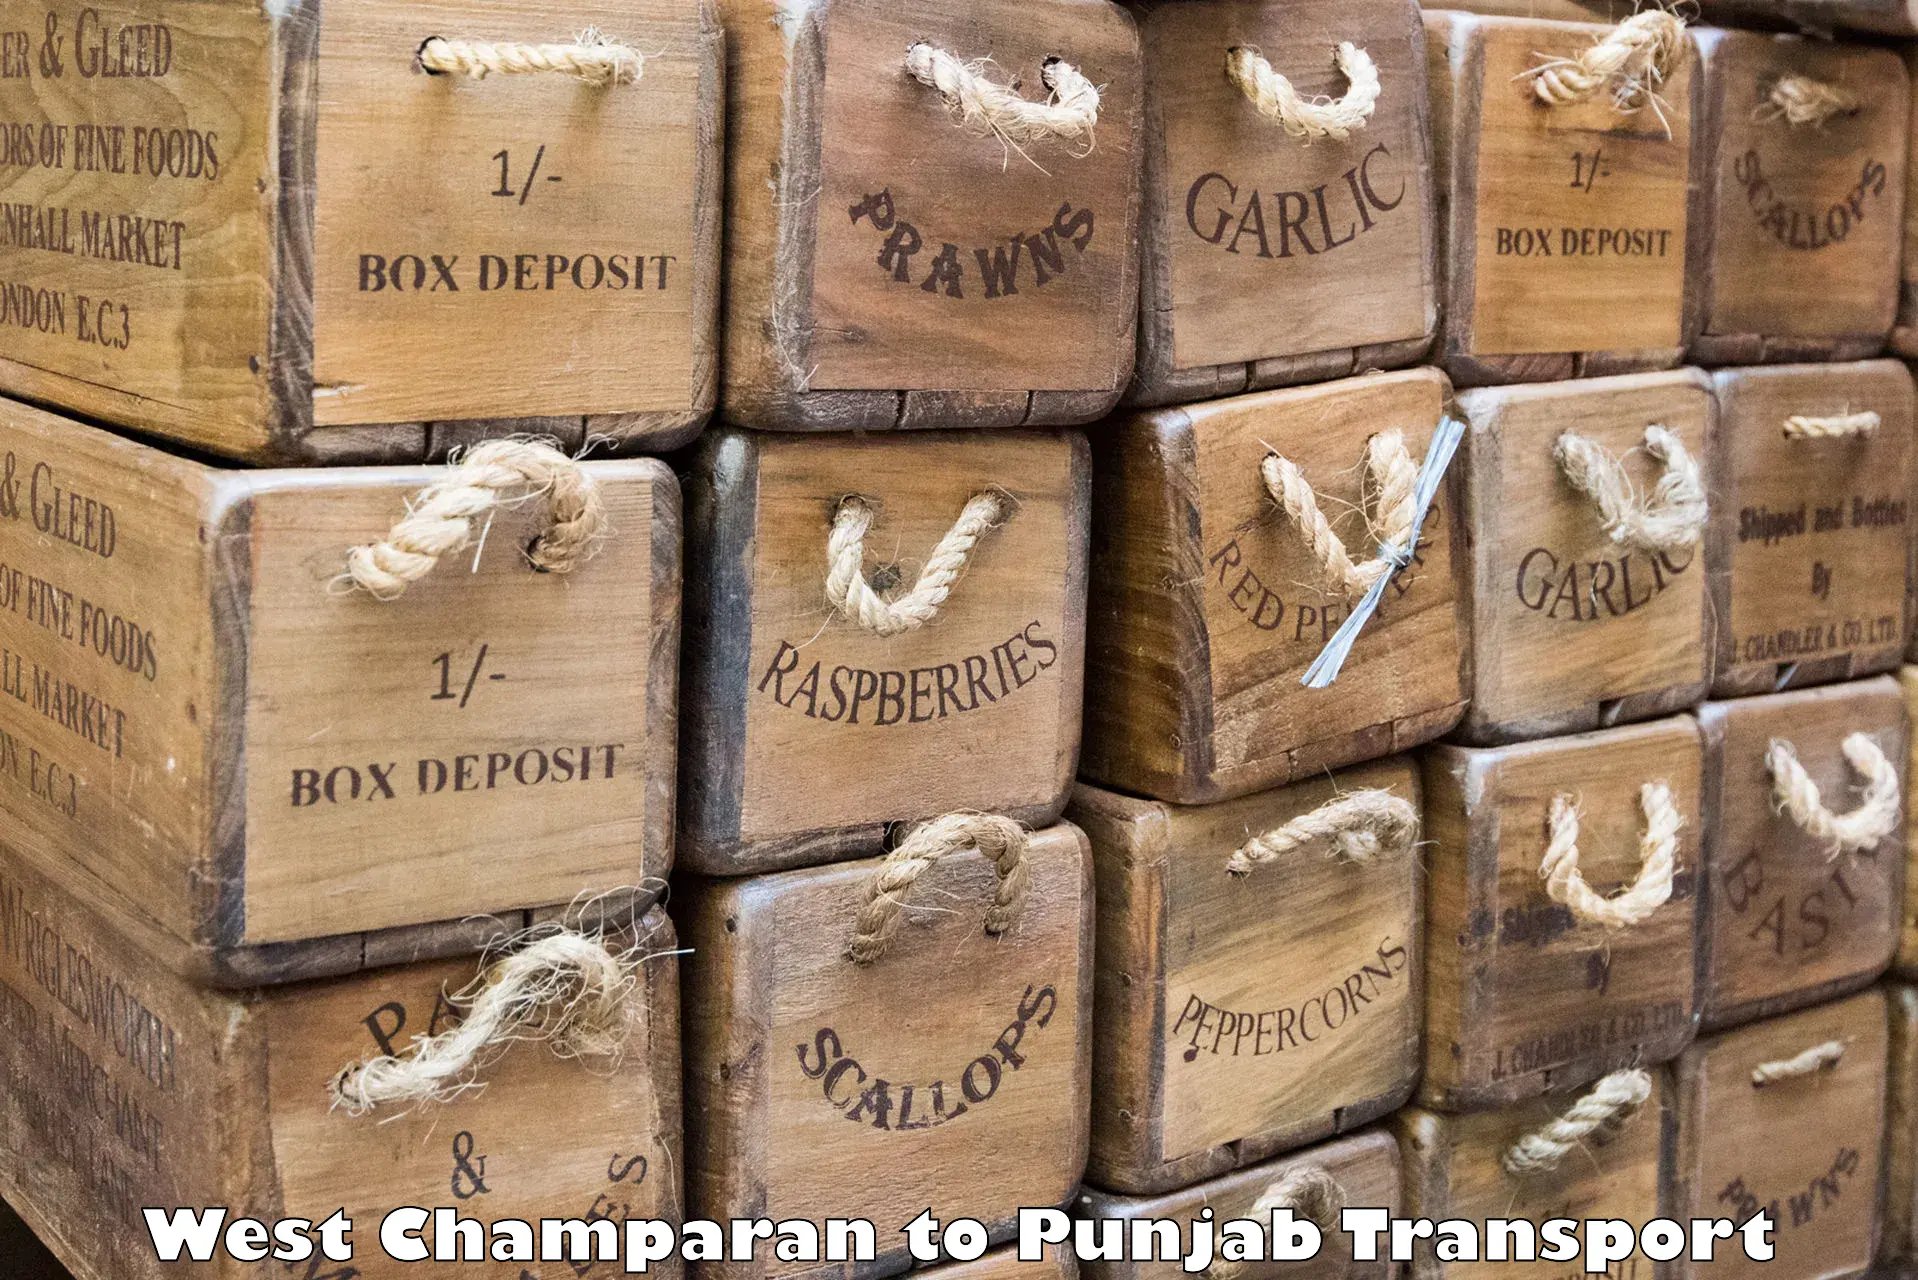 Cargo train transport services West Champaran to Punjab